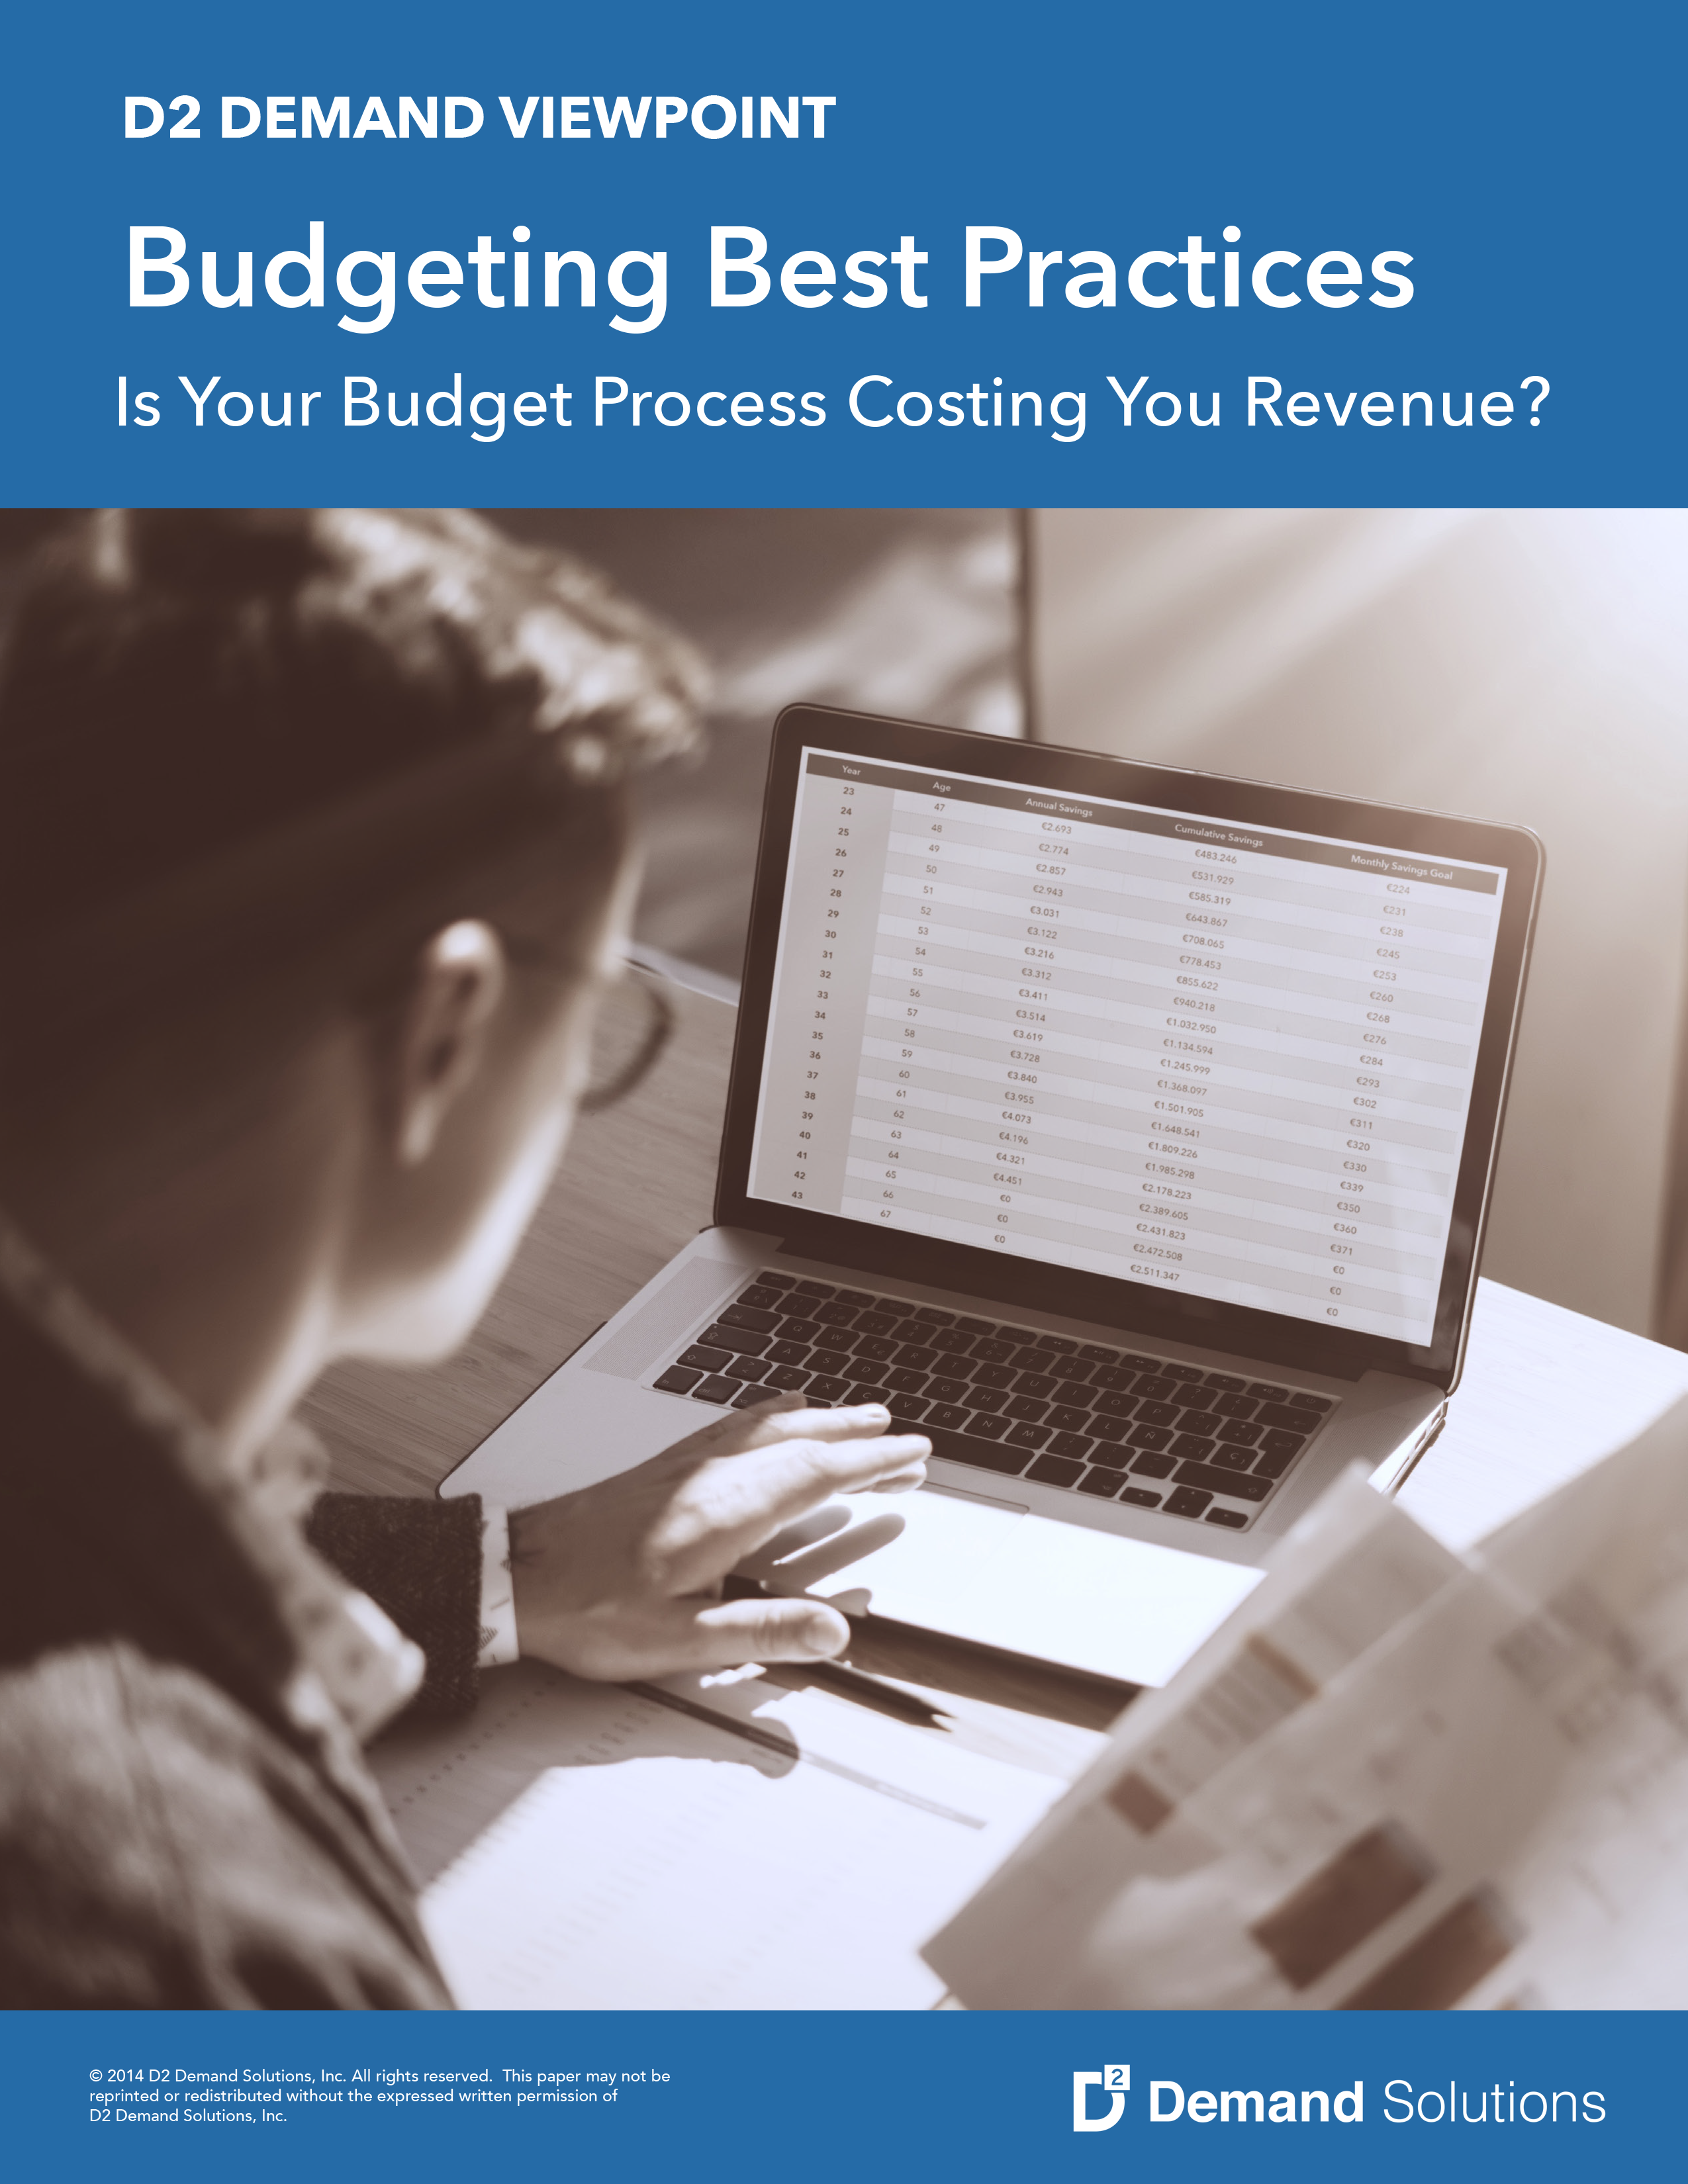 Sep20_D2_Viewpoint_Budgeting Best Practices (1)-1